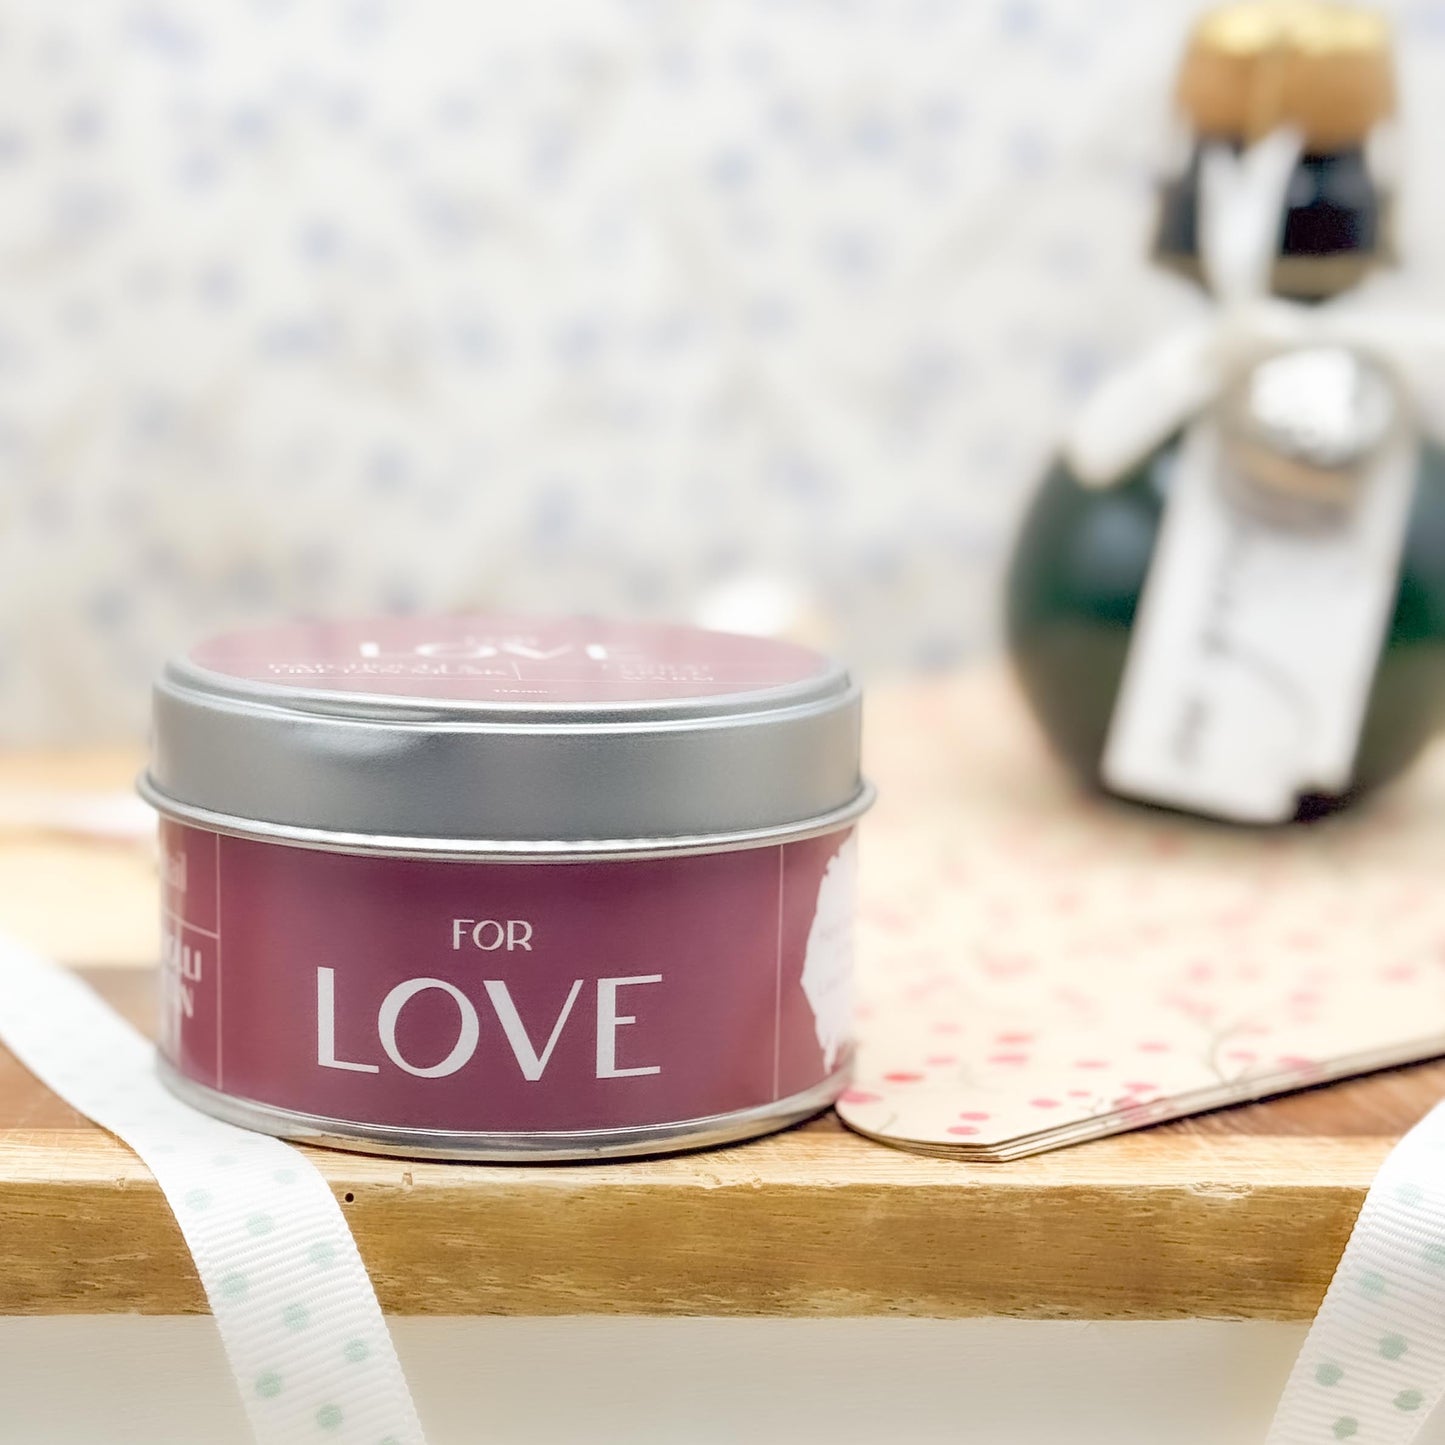 'For Love' Patchouli & Tibetan Musk Occasion Candle